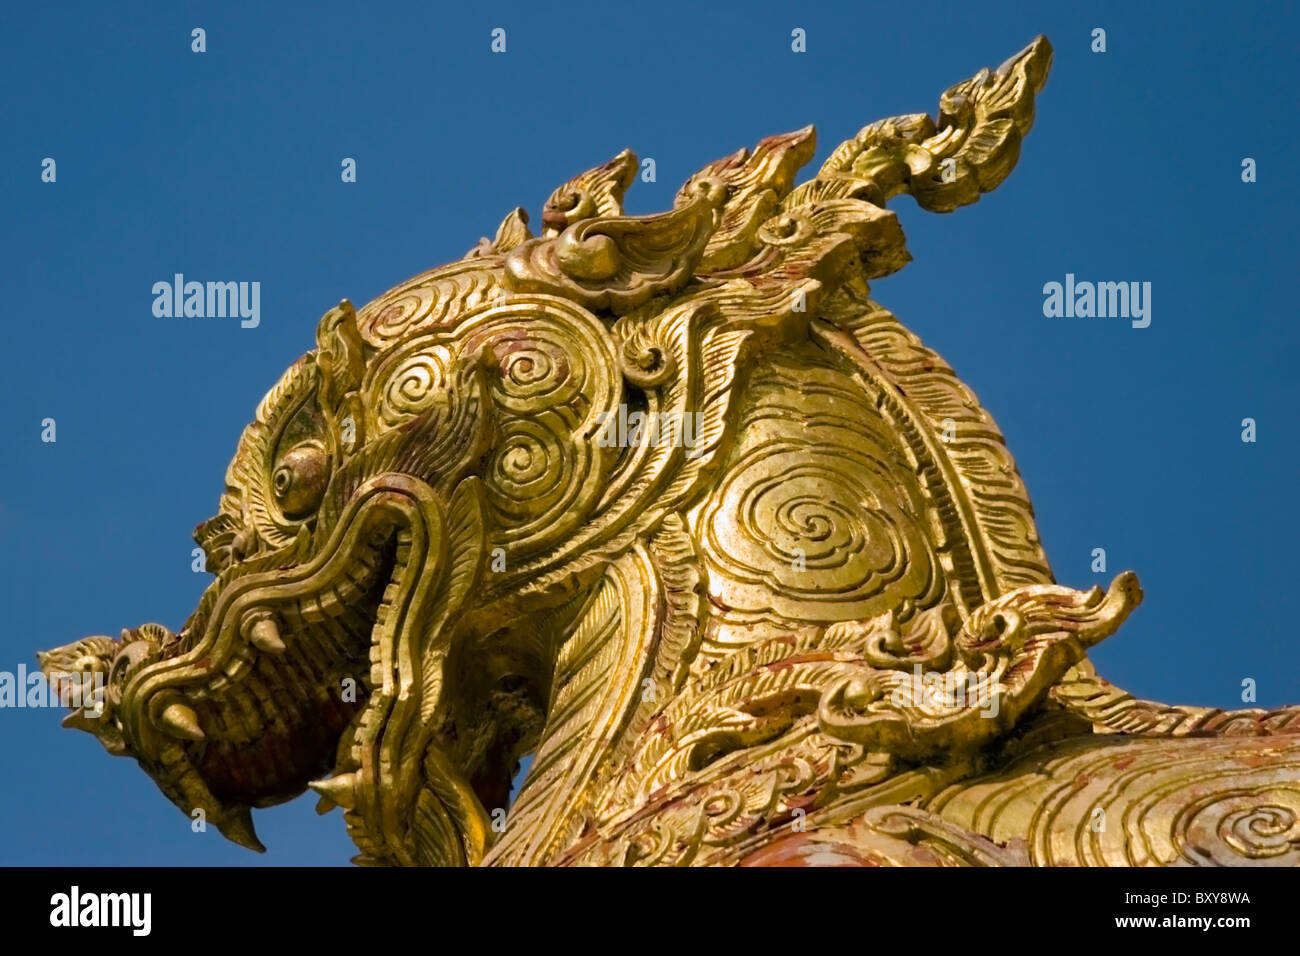 Beautiful Ancient near eastern old bronze door handle in the form of a dragon figure Sculpture